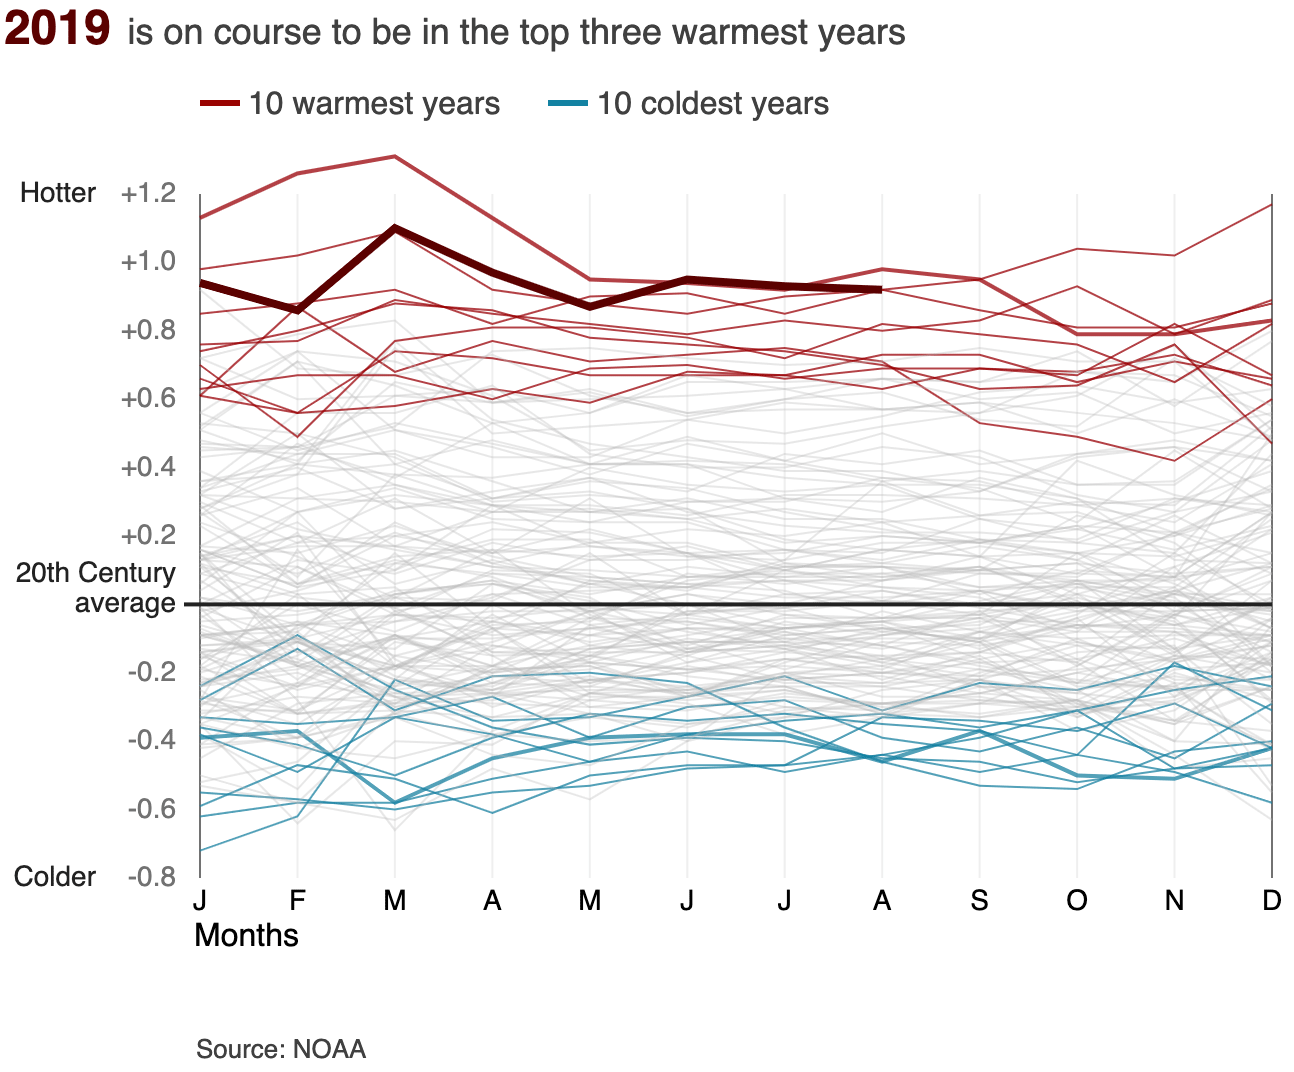 Animated chart showing that most of the coldest 10 years compared to the 20th century average were in the early 1900s, while the warmest years have all been since 2000, with 2018 on course to be the fourth warmest year on record